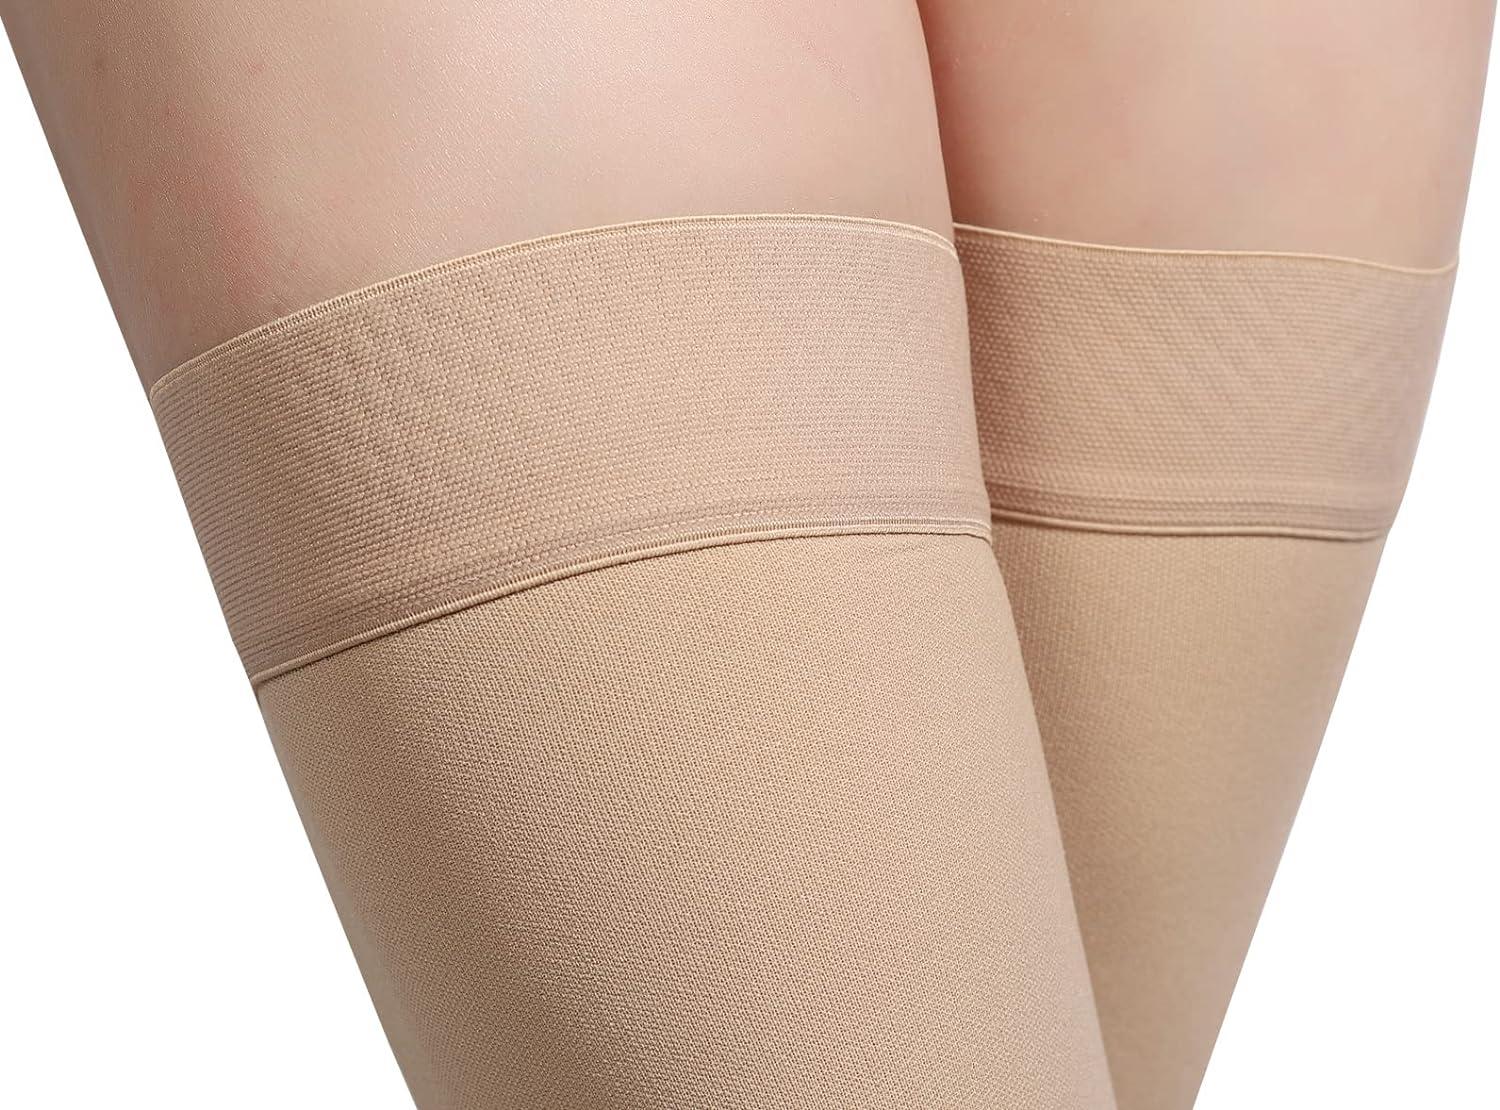 Thigh High Compression Stockings Open Toe Pair Firm Support 20-30mmHg  Gradient Compression Socks with Silicone Band Unisex Opaque Best for Spider  & Varicose Veins Edema Swelling Beige XL XL Beige